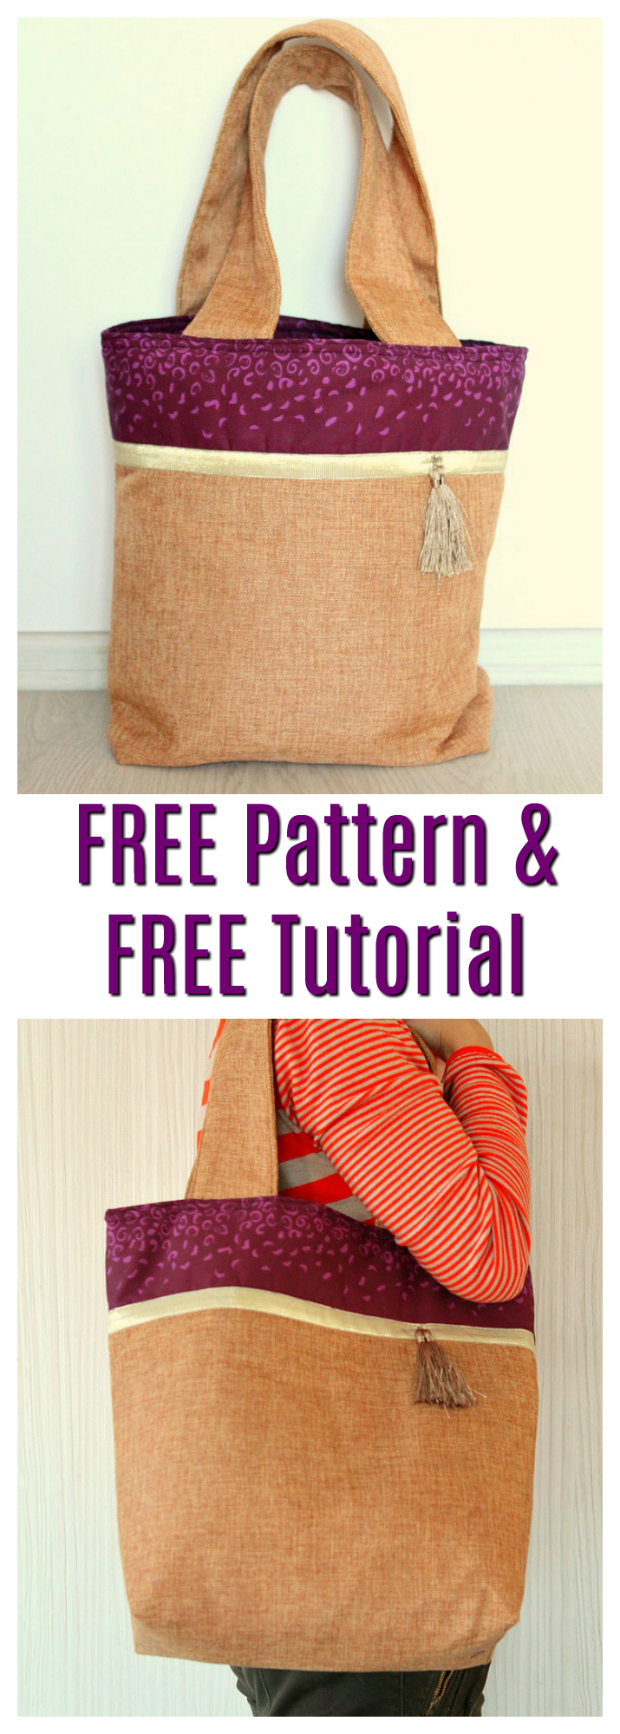 Here's a really great looking two-tone tote bag that is perfect for the beginner sewist. And what's even better is you get the pattern and a tutorial for this medium-large bag completely FREE.